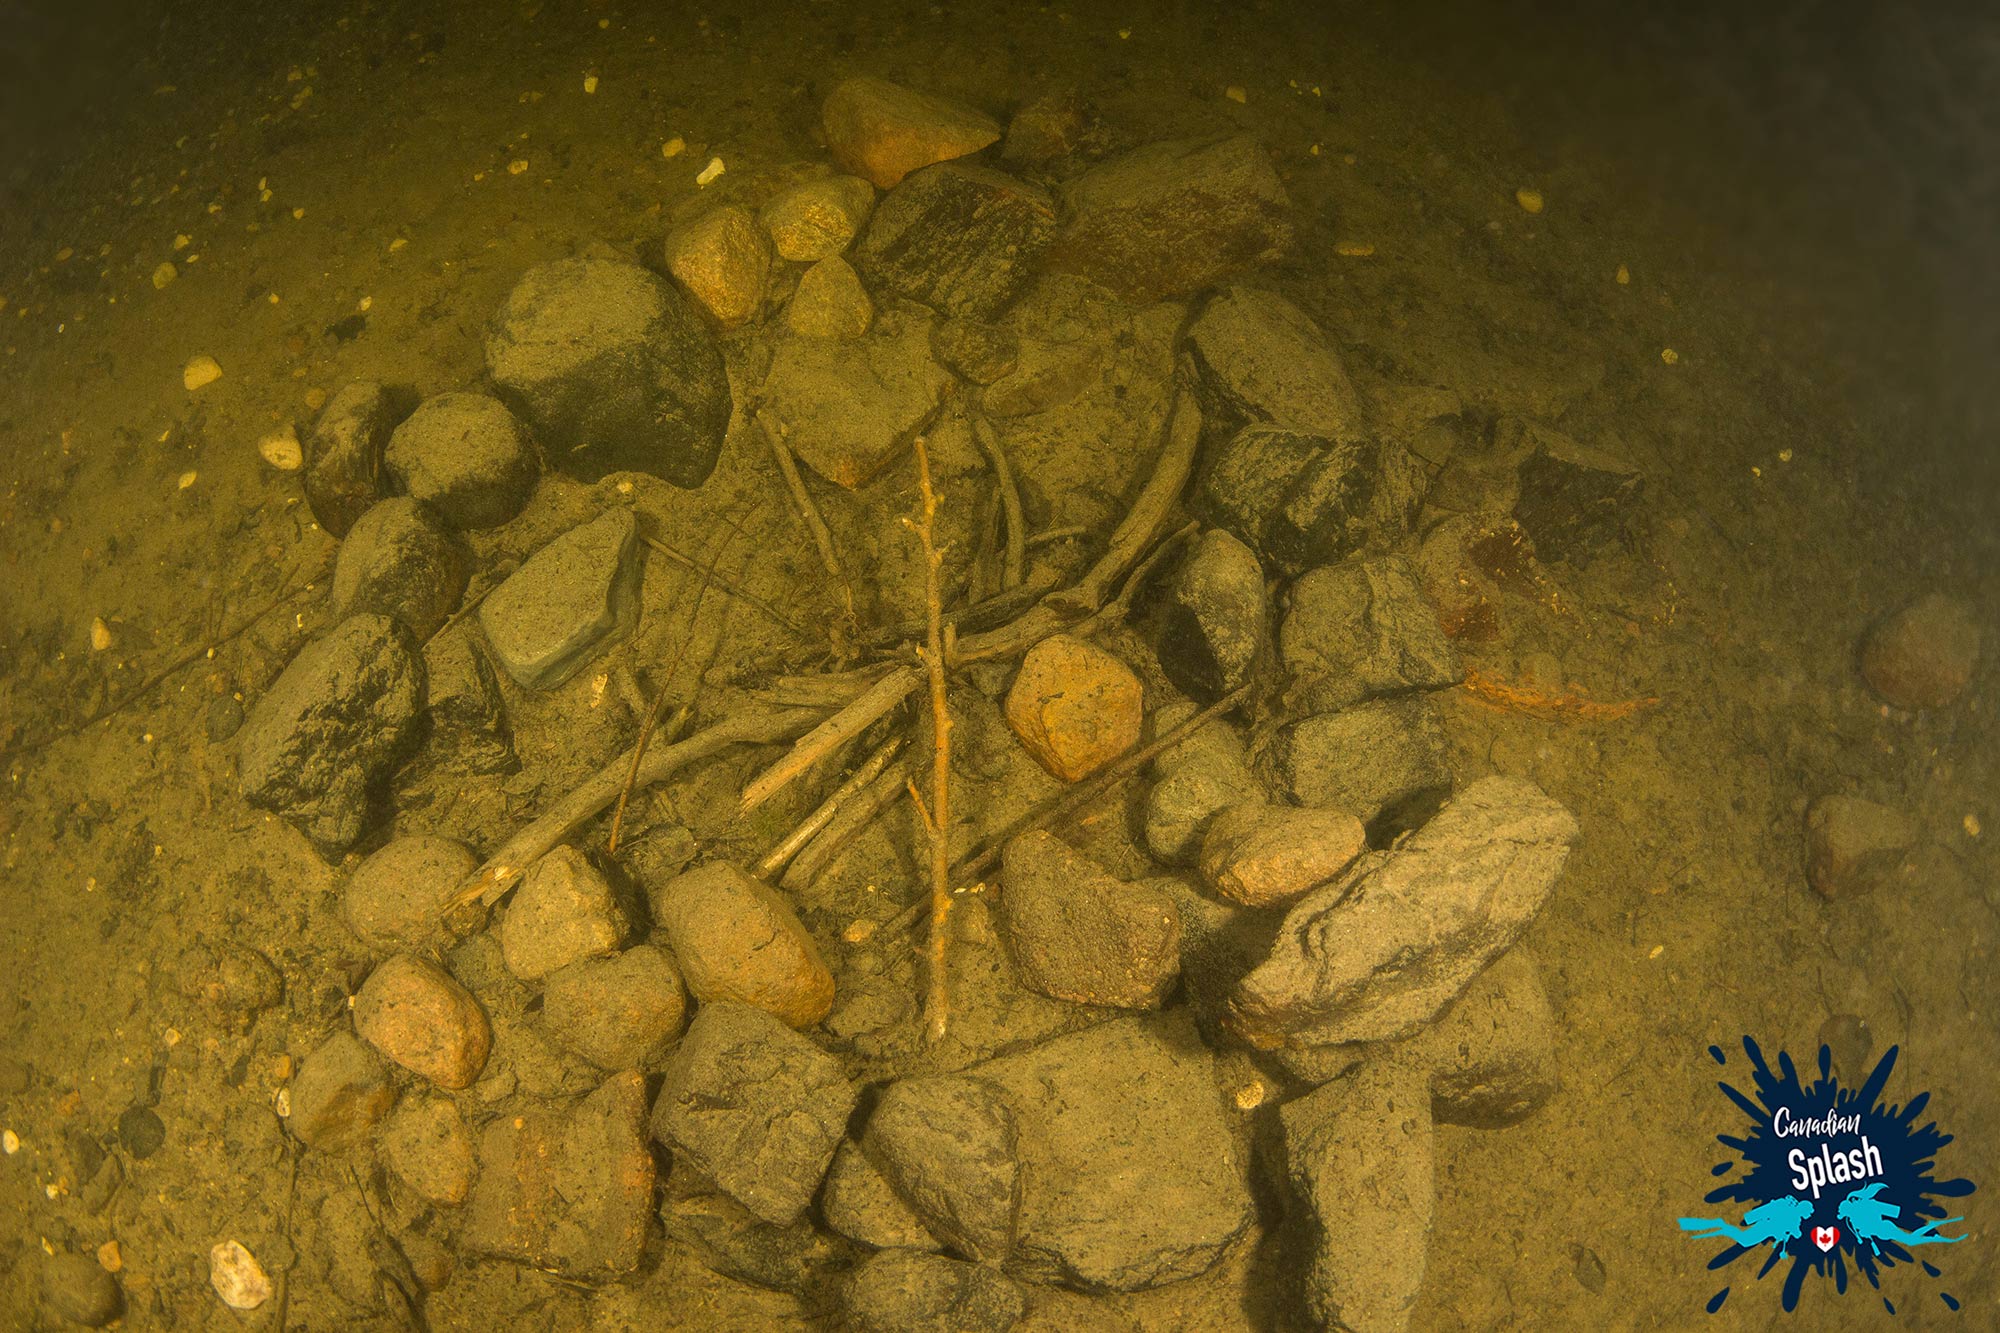 An Underwater Camp Fire On The Bottom Of A Crater Formed Lake, Manitoba's West Hawk, Canada Scuba Diving